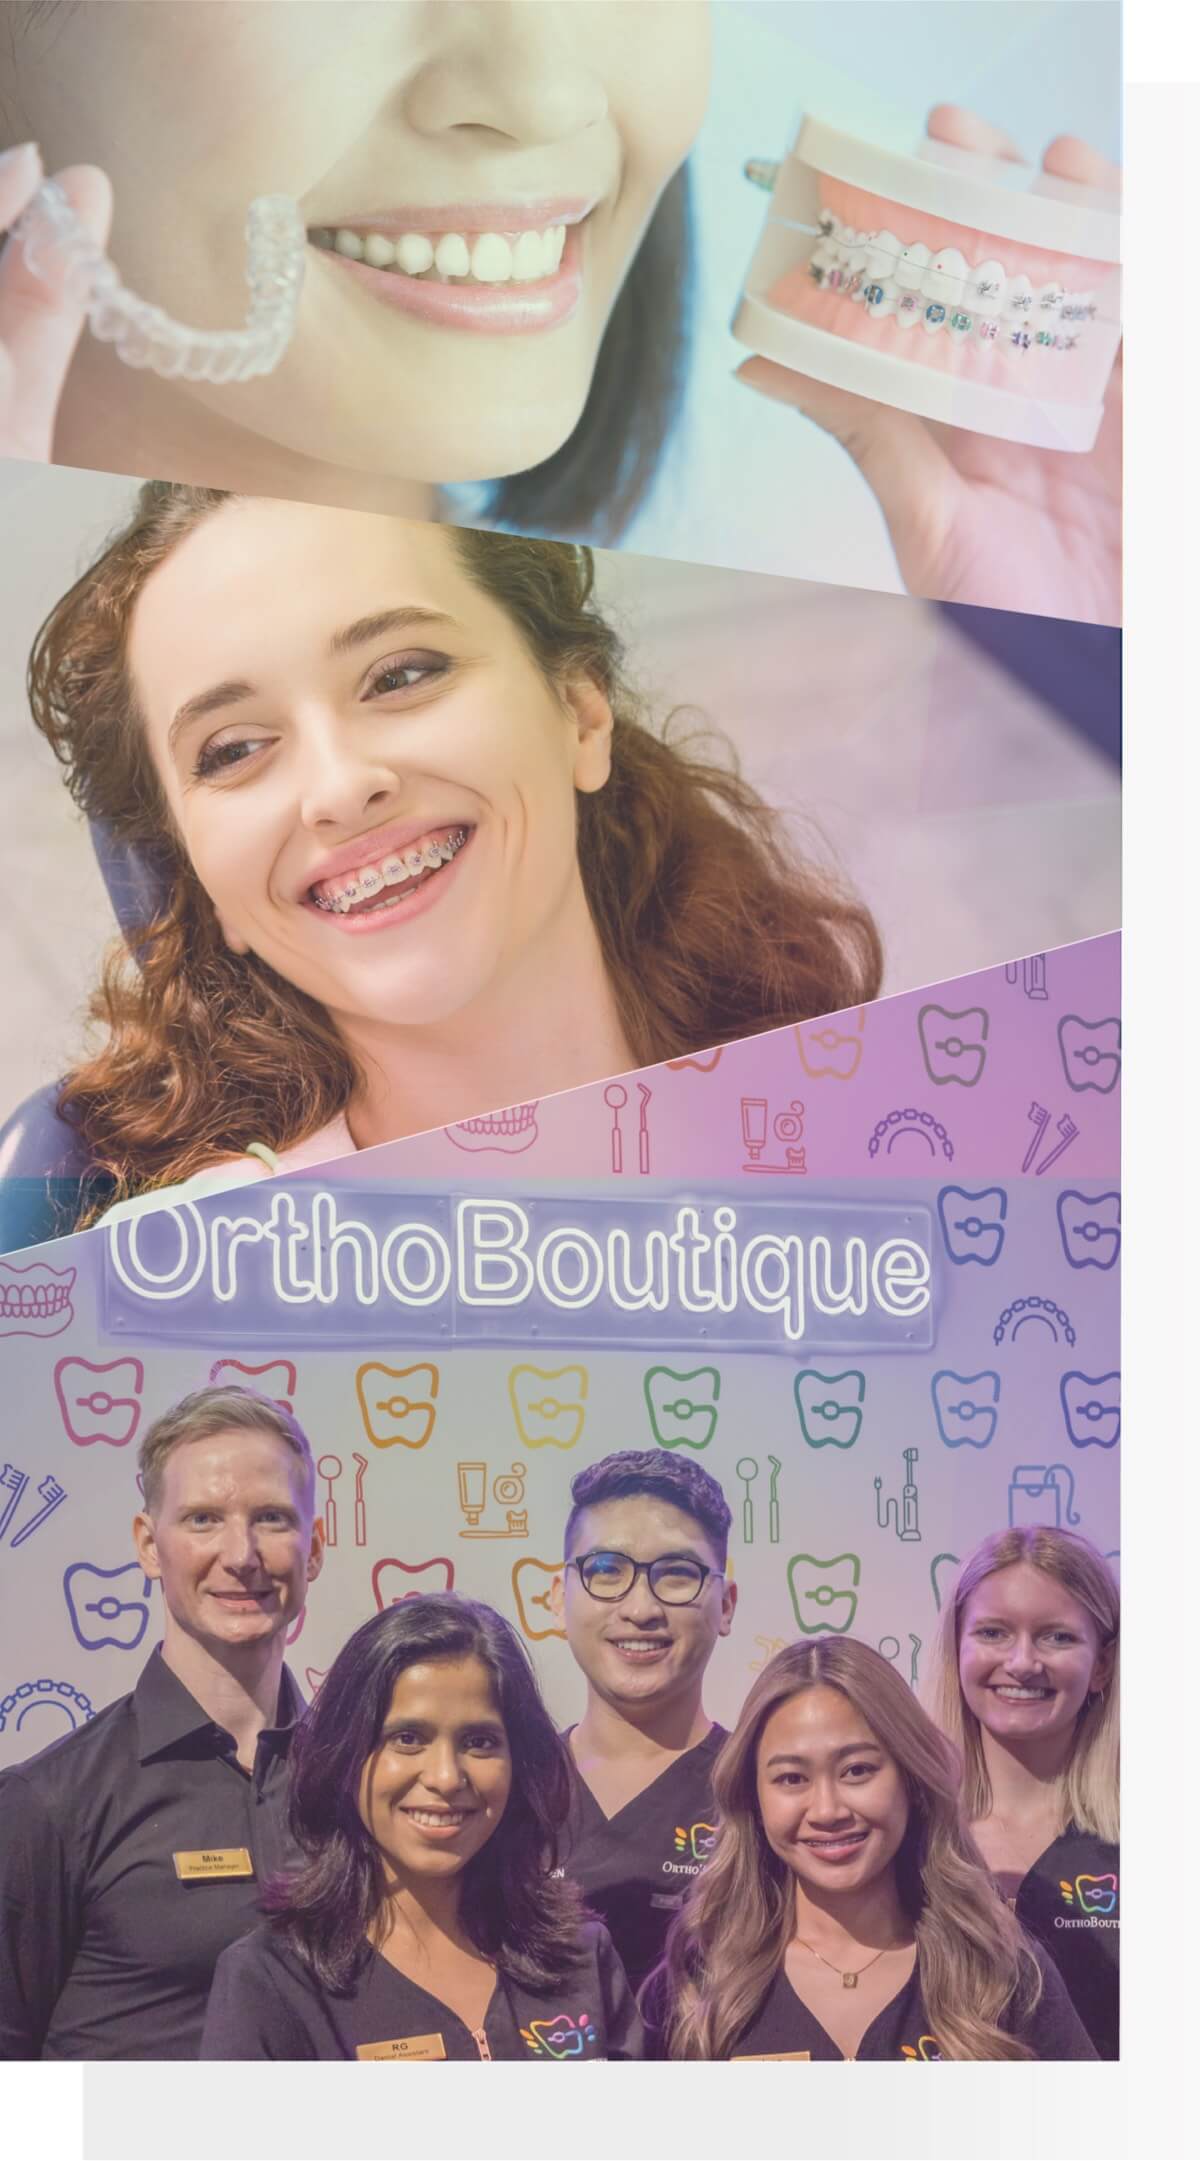 OrthoBoutique - collage image of A woman smiling with braces and a group of dentists, representing OrthoBoutique's dedication to providing quality orthodontic care with a team of skilled professionals